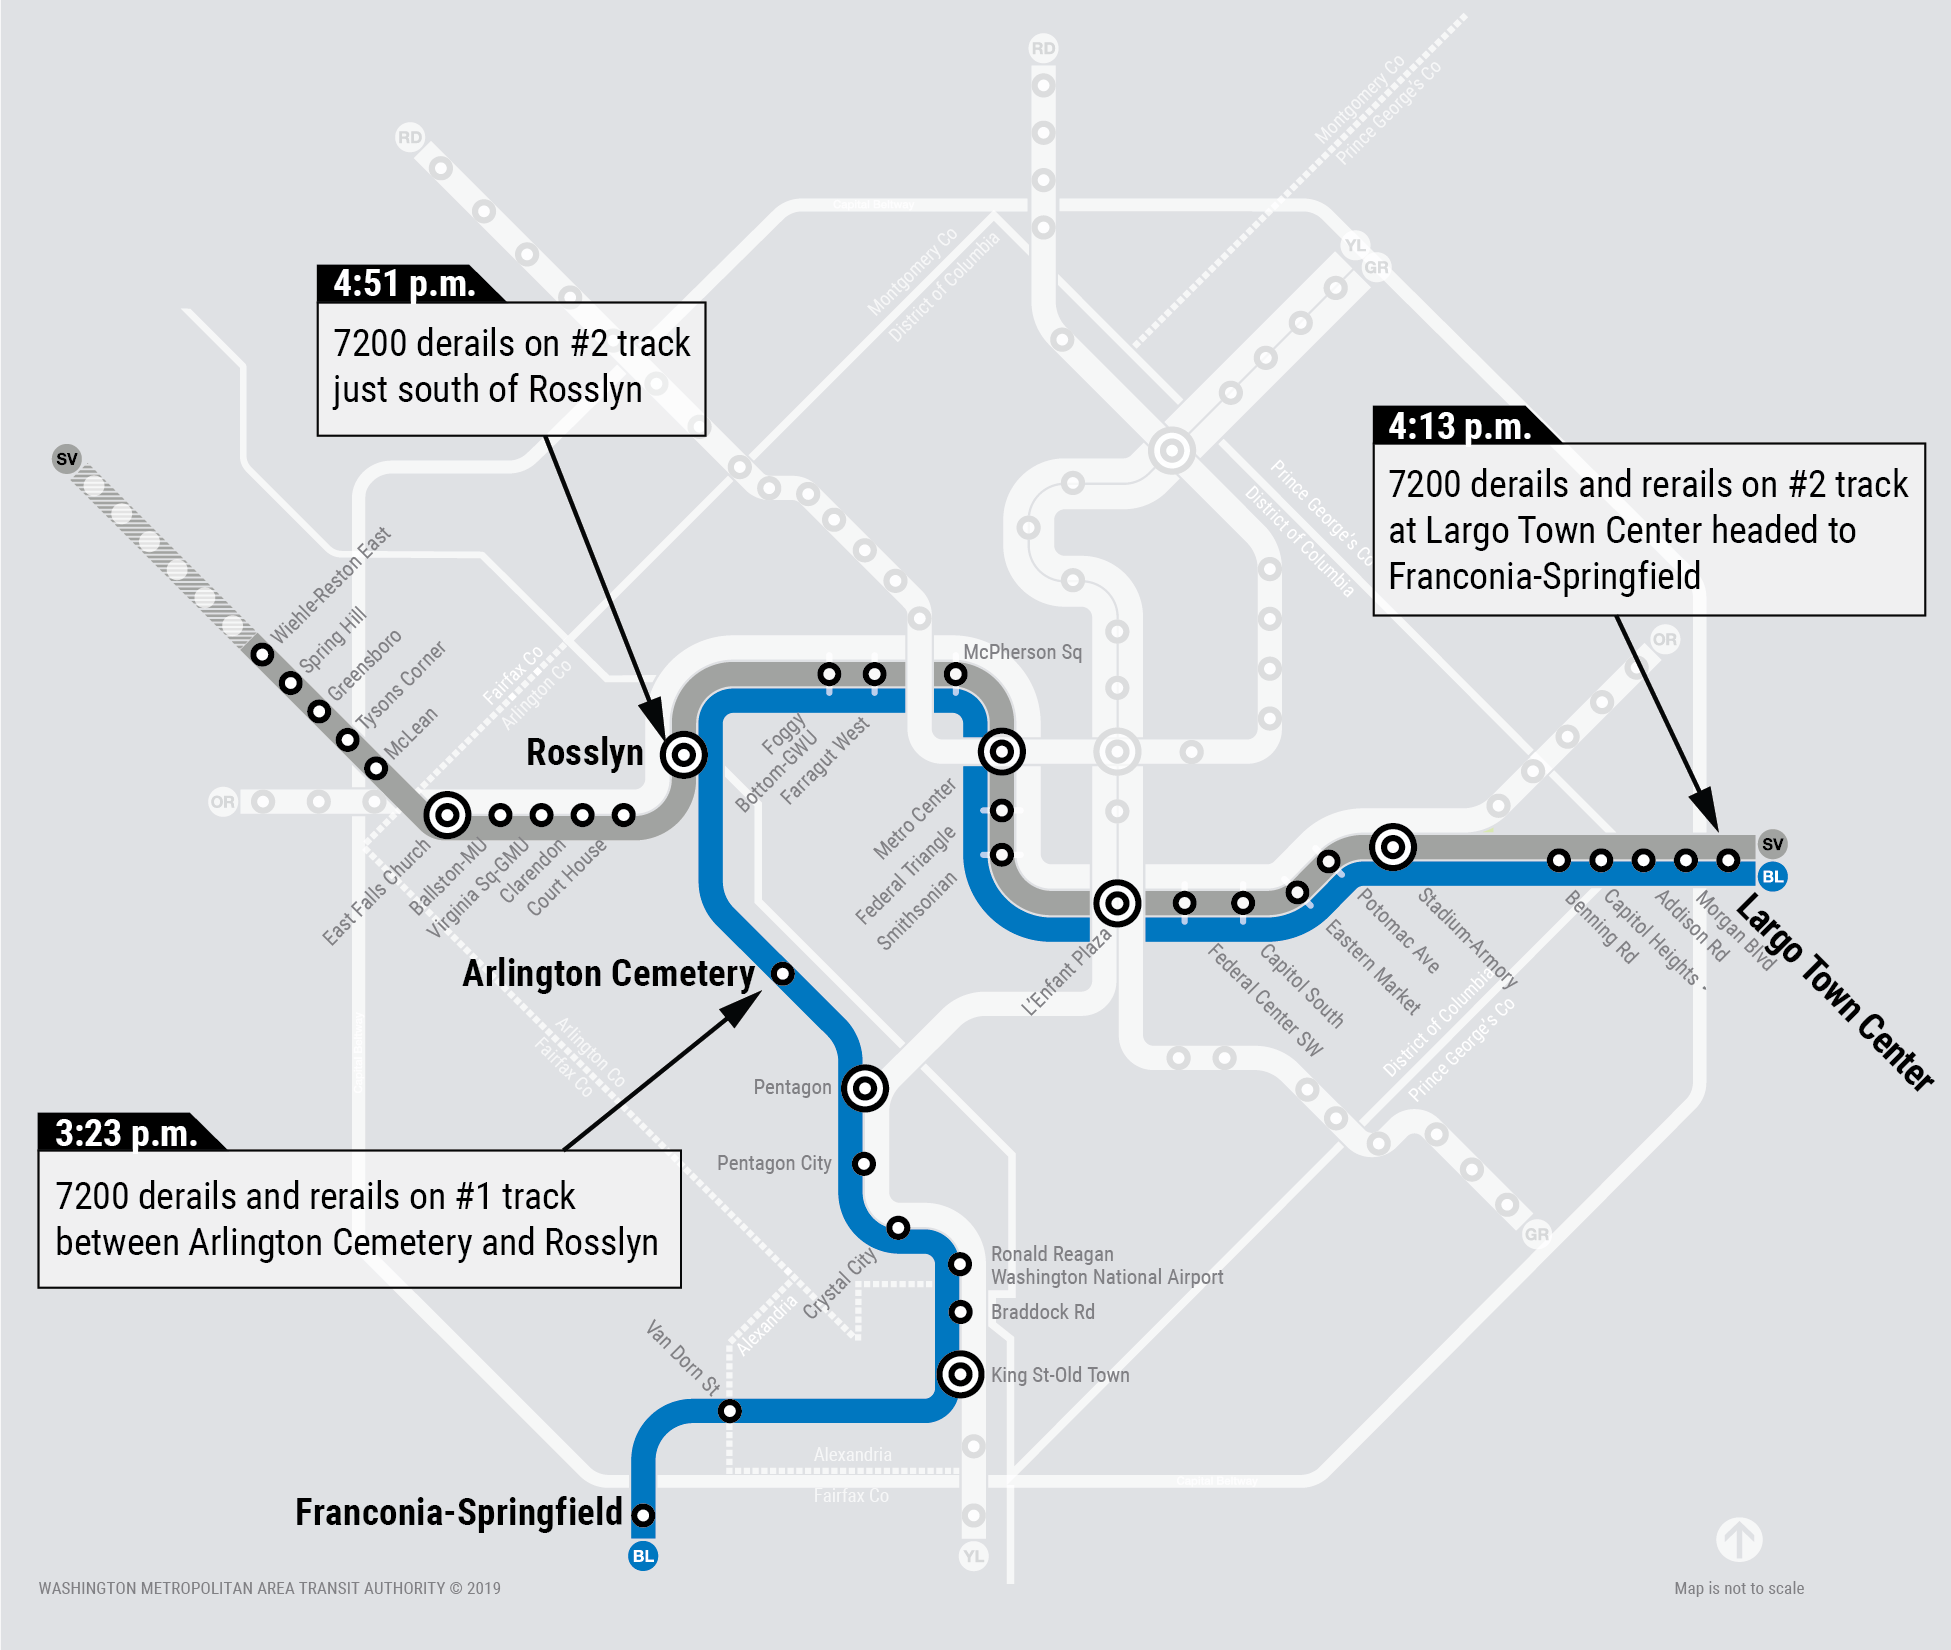 Map of the WMATA blue and silver lines with the locations where 7200 derailed noted.